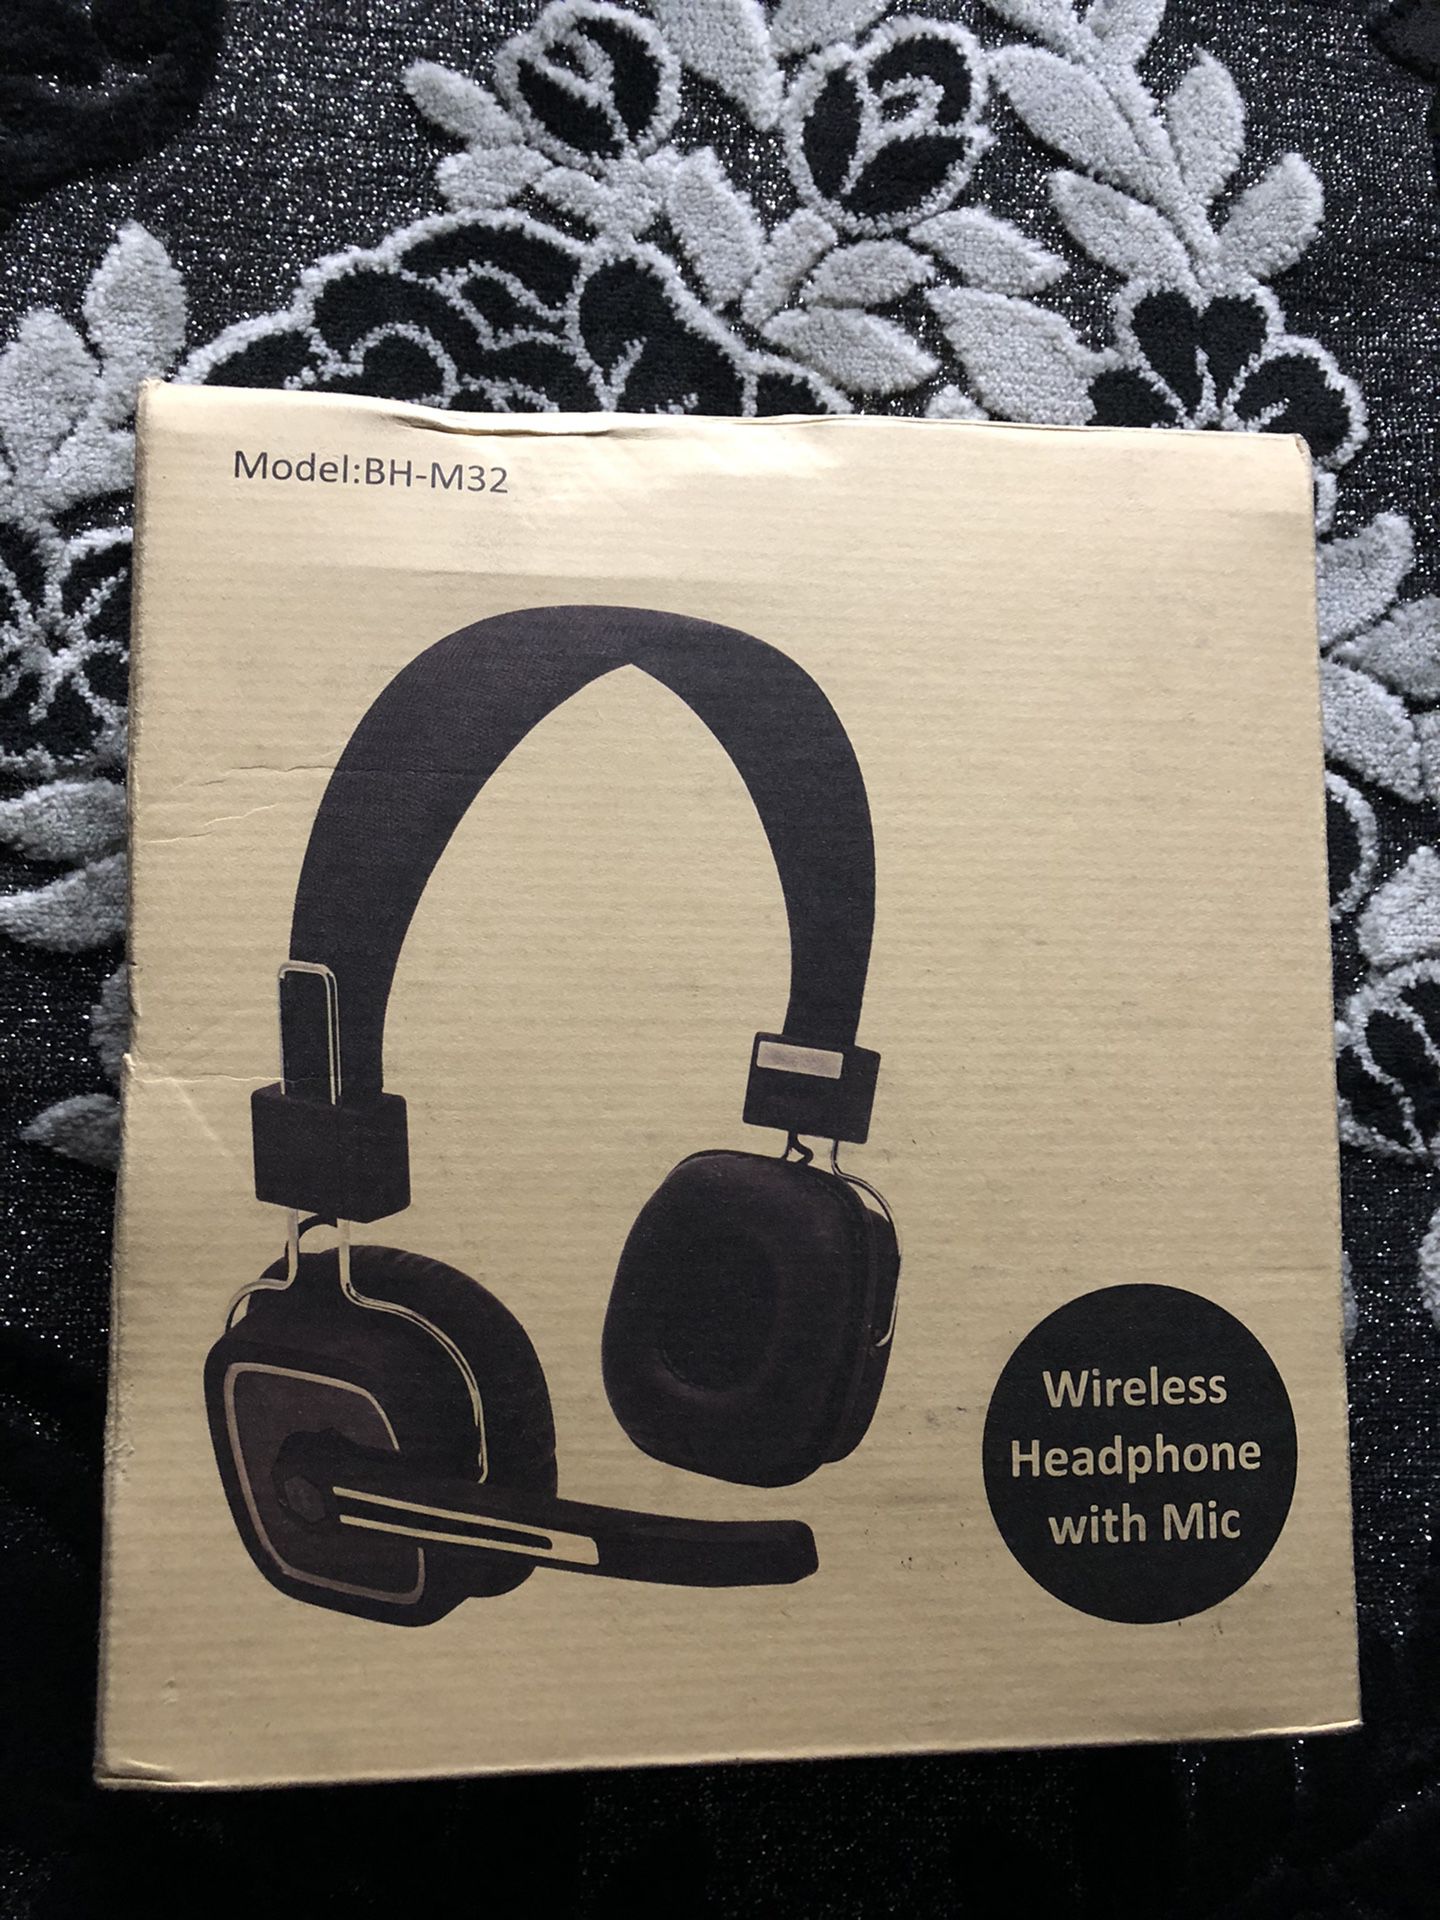 Wireless Bluetooth headphone with noise cancellation mic